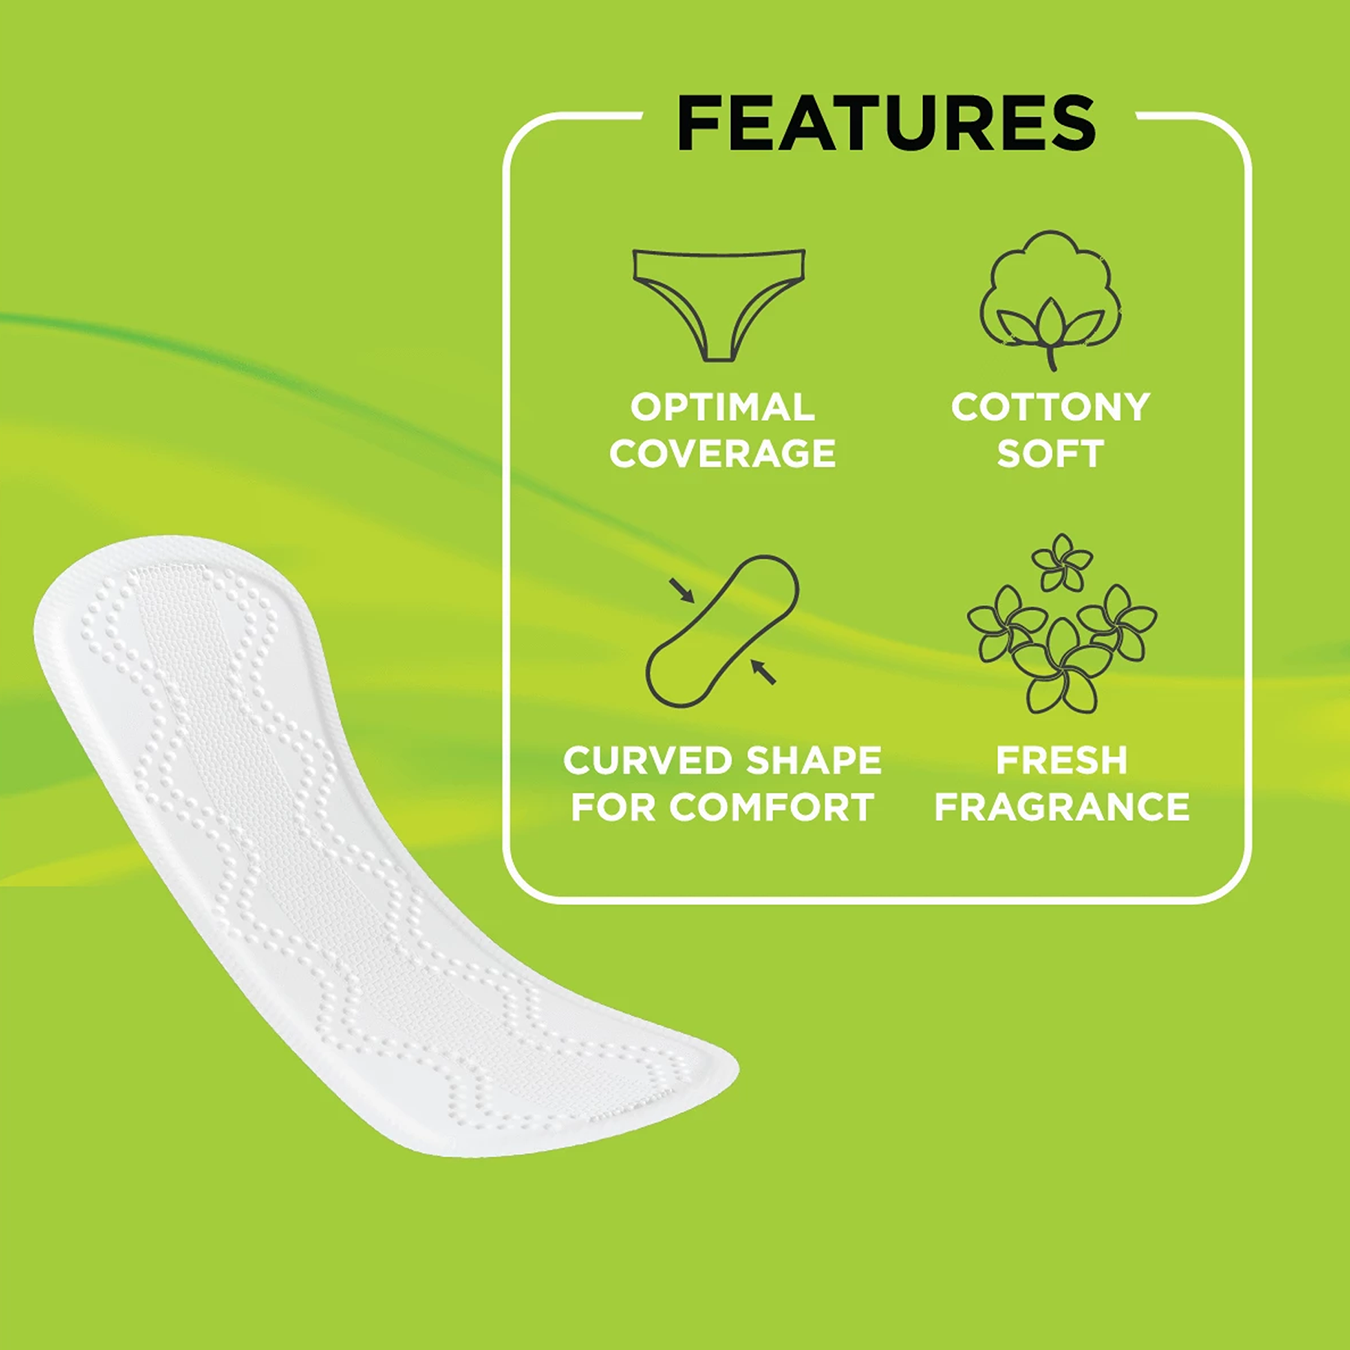 Pee Safe Aloe Vera Panty Liners - Pack of 50